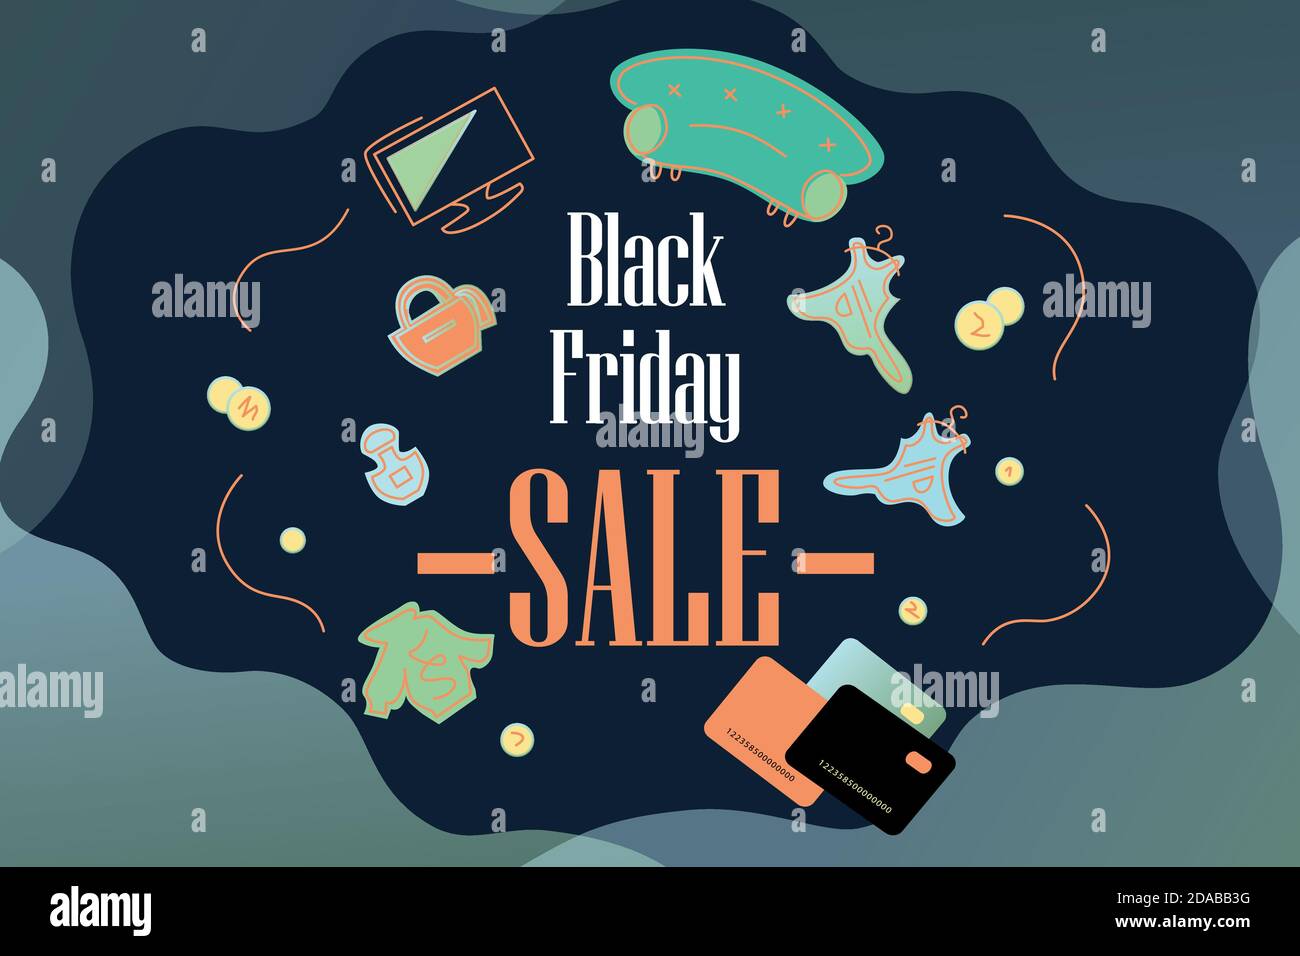 Black Friday 2020, online shoppig Facebook cover, smart consumption web banner. Vector illustration buying consume things: sofa, clothes, shoes, cosme Stock Vector